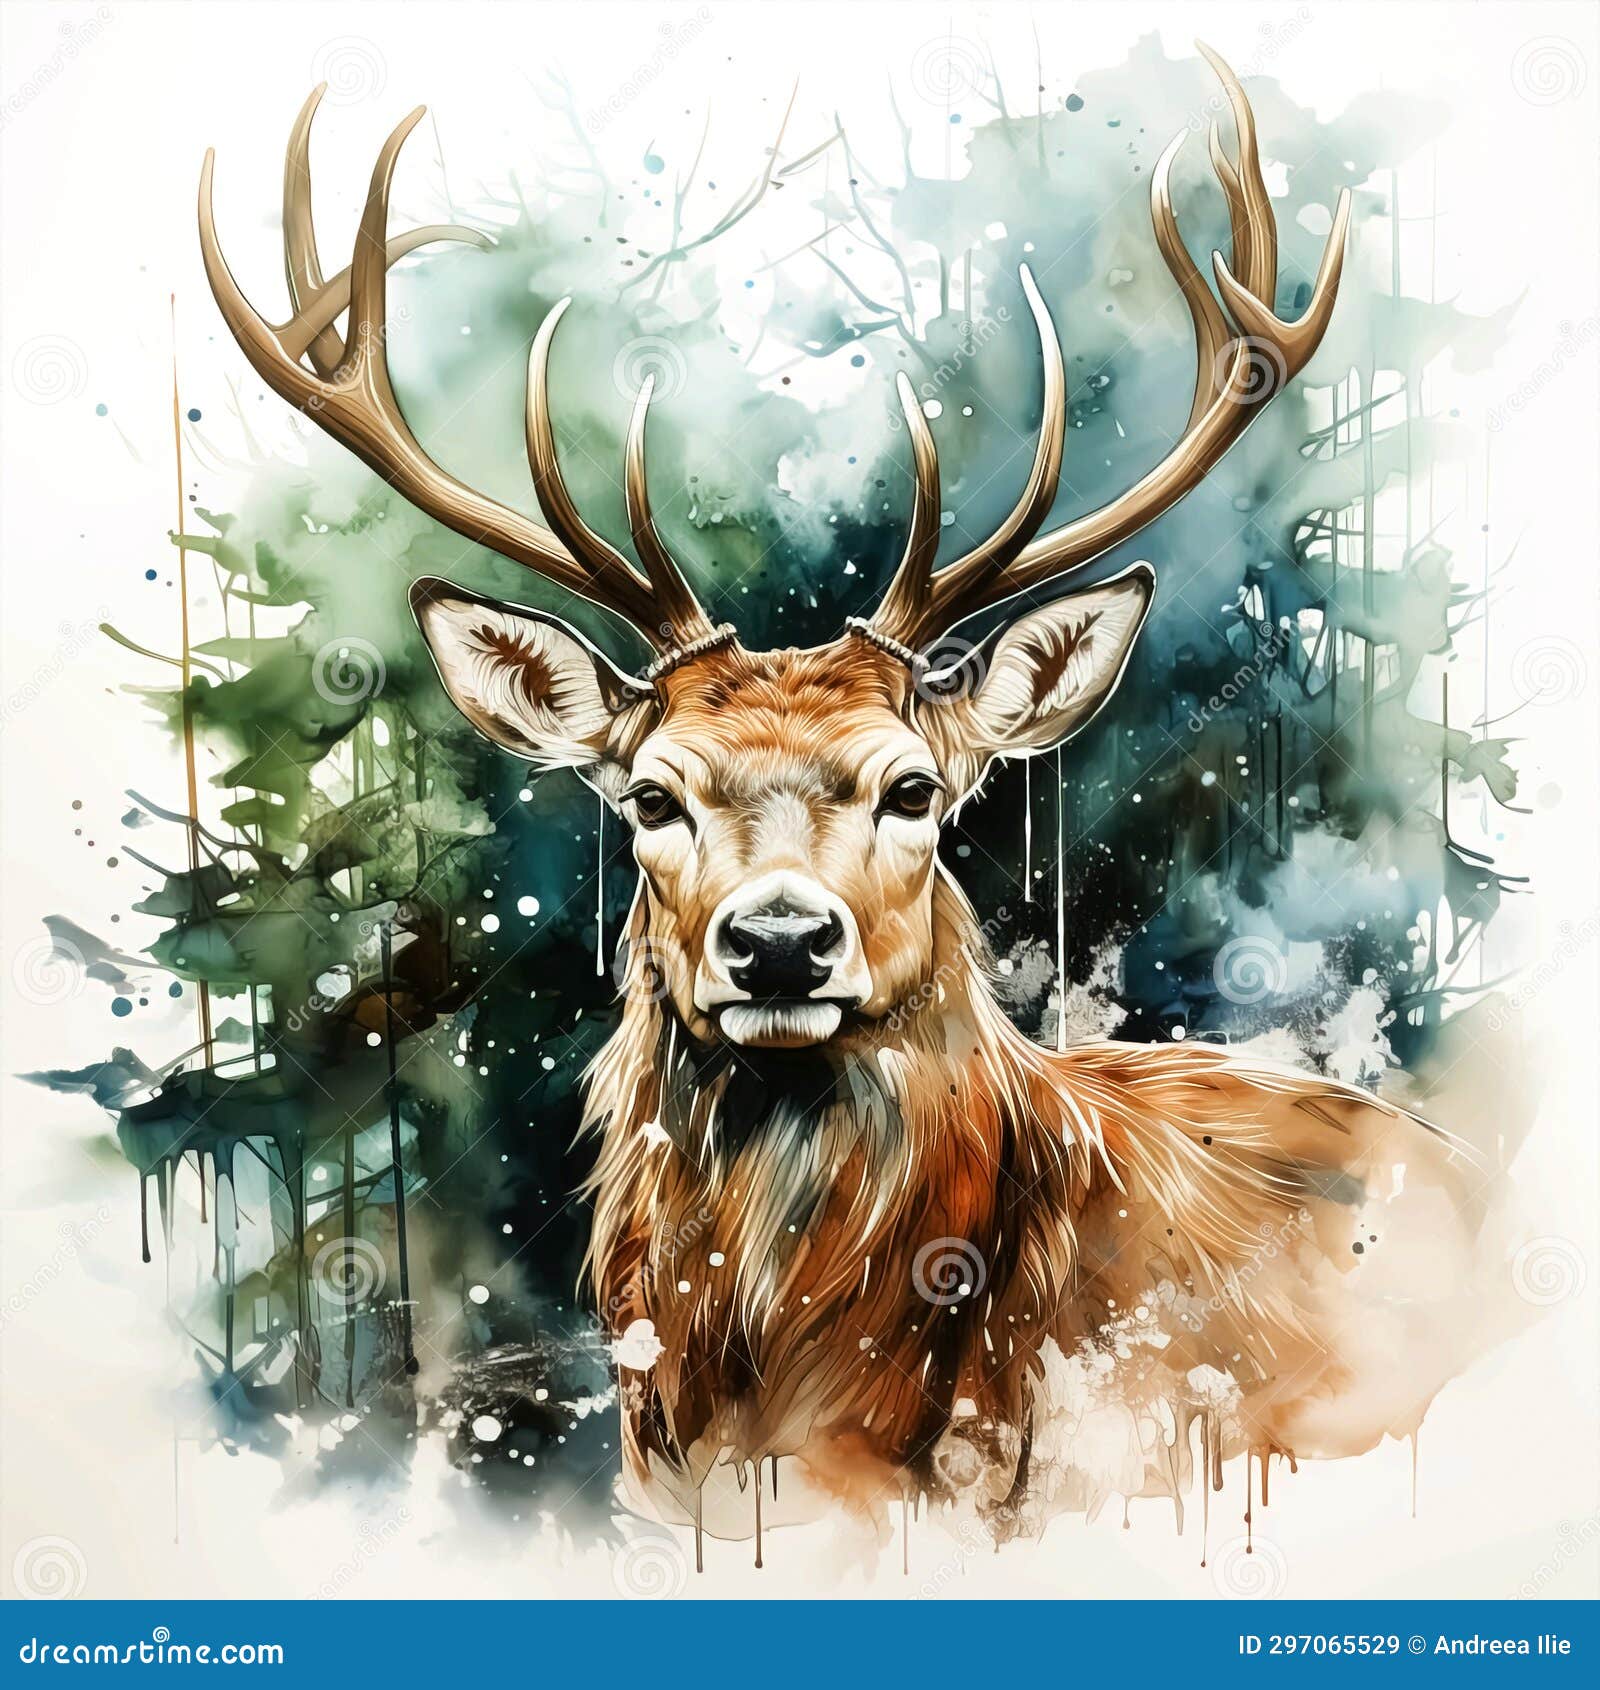 majestic stag - graceful watercolor portrait in nature's serenity